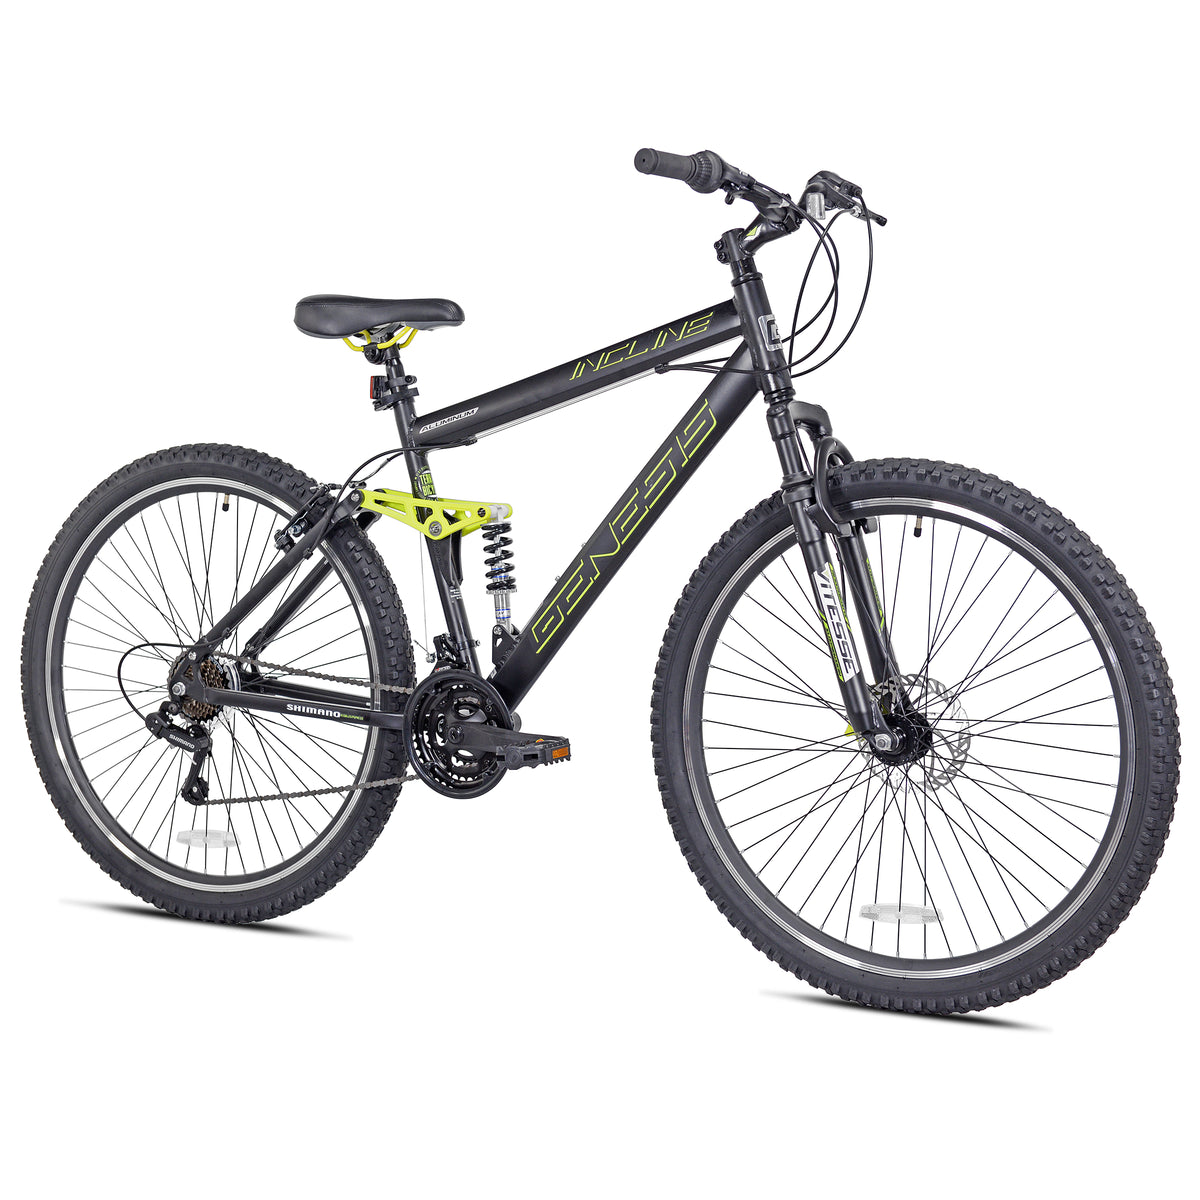 29" Genesis Incline | Mountain Bike for Men Ages 14+